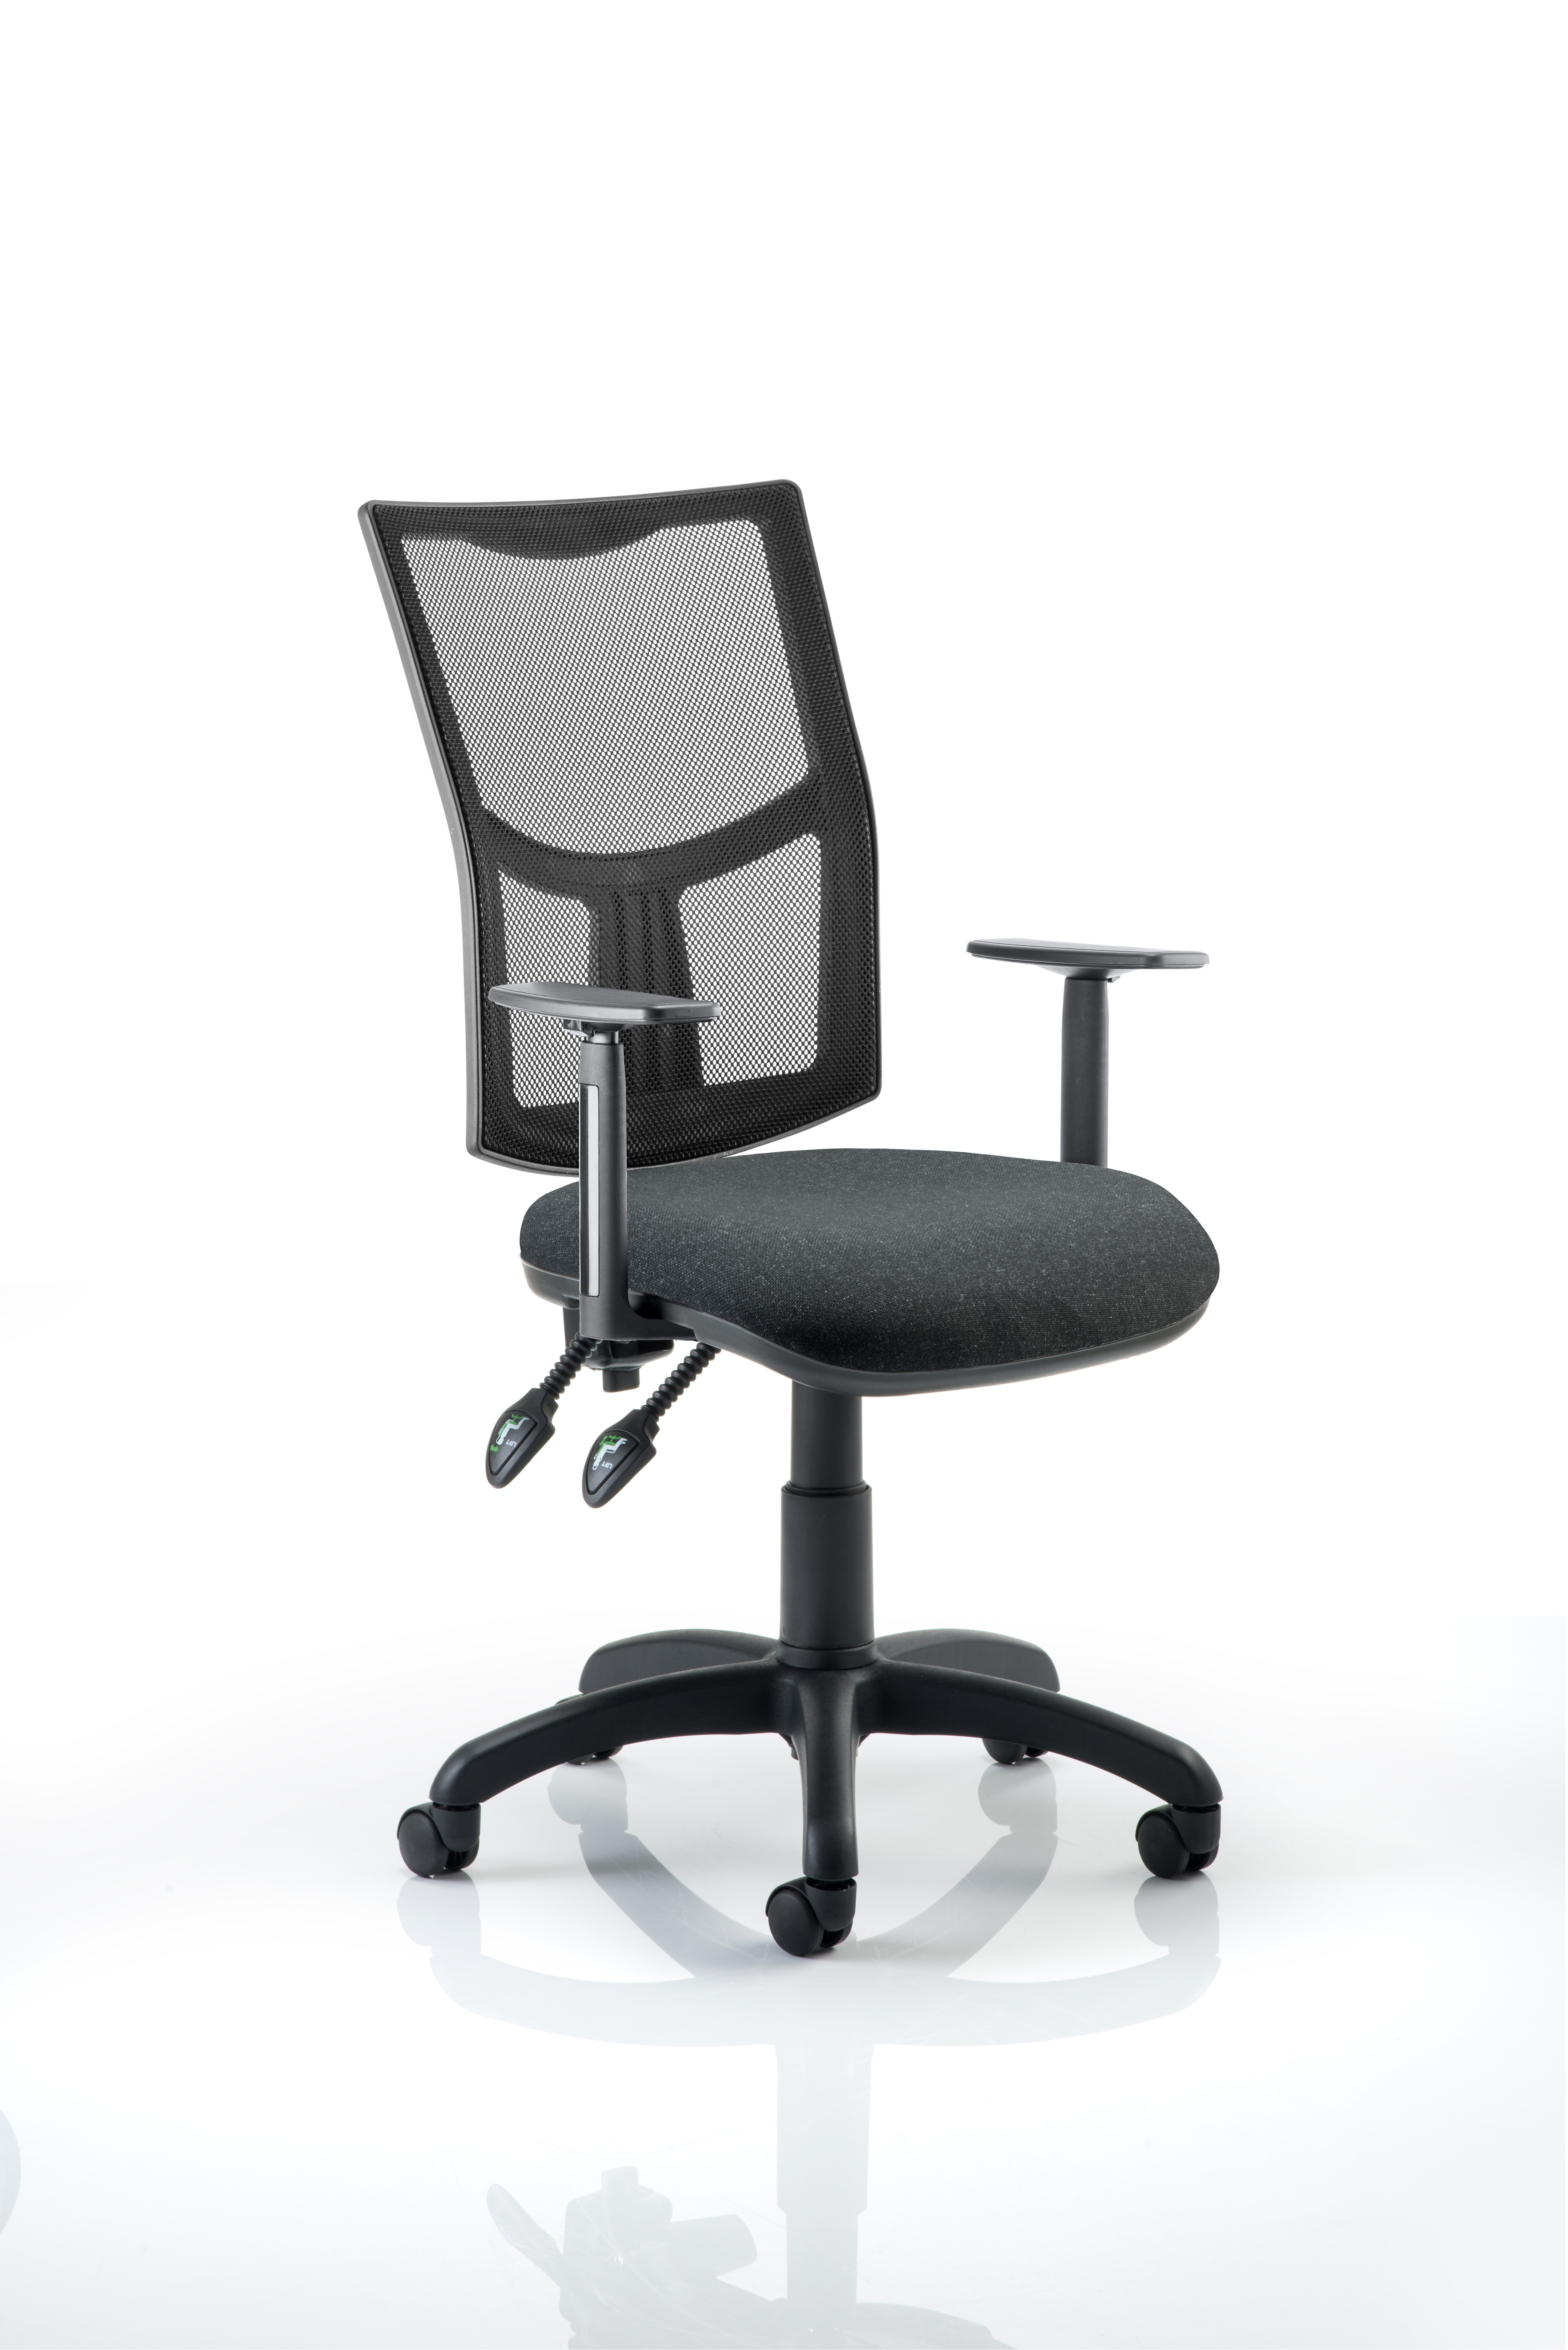 Eclipse Plus II Mesh Chair Charcoal Adjustable Arms KC0174